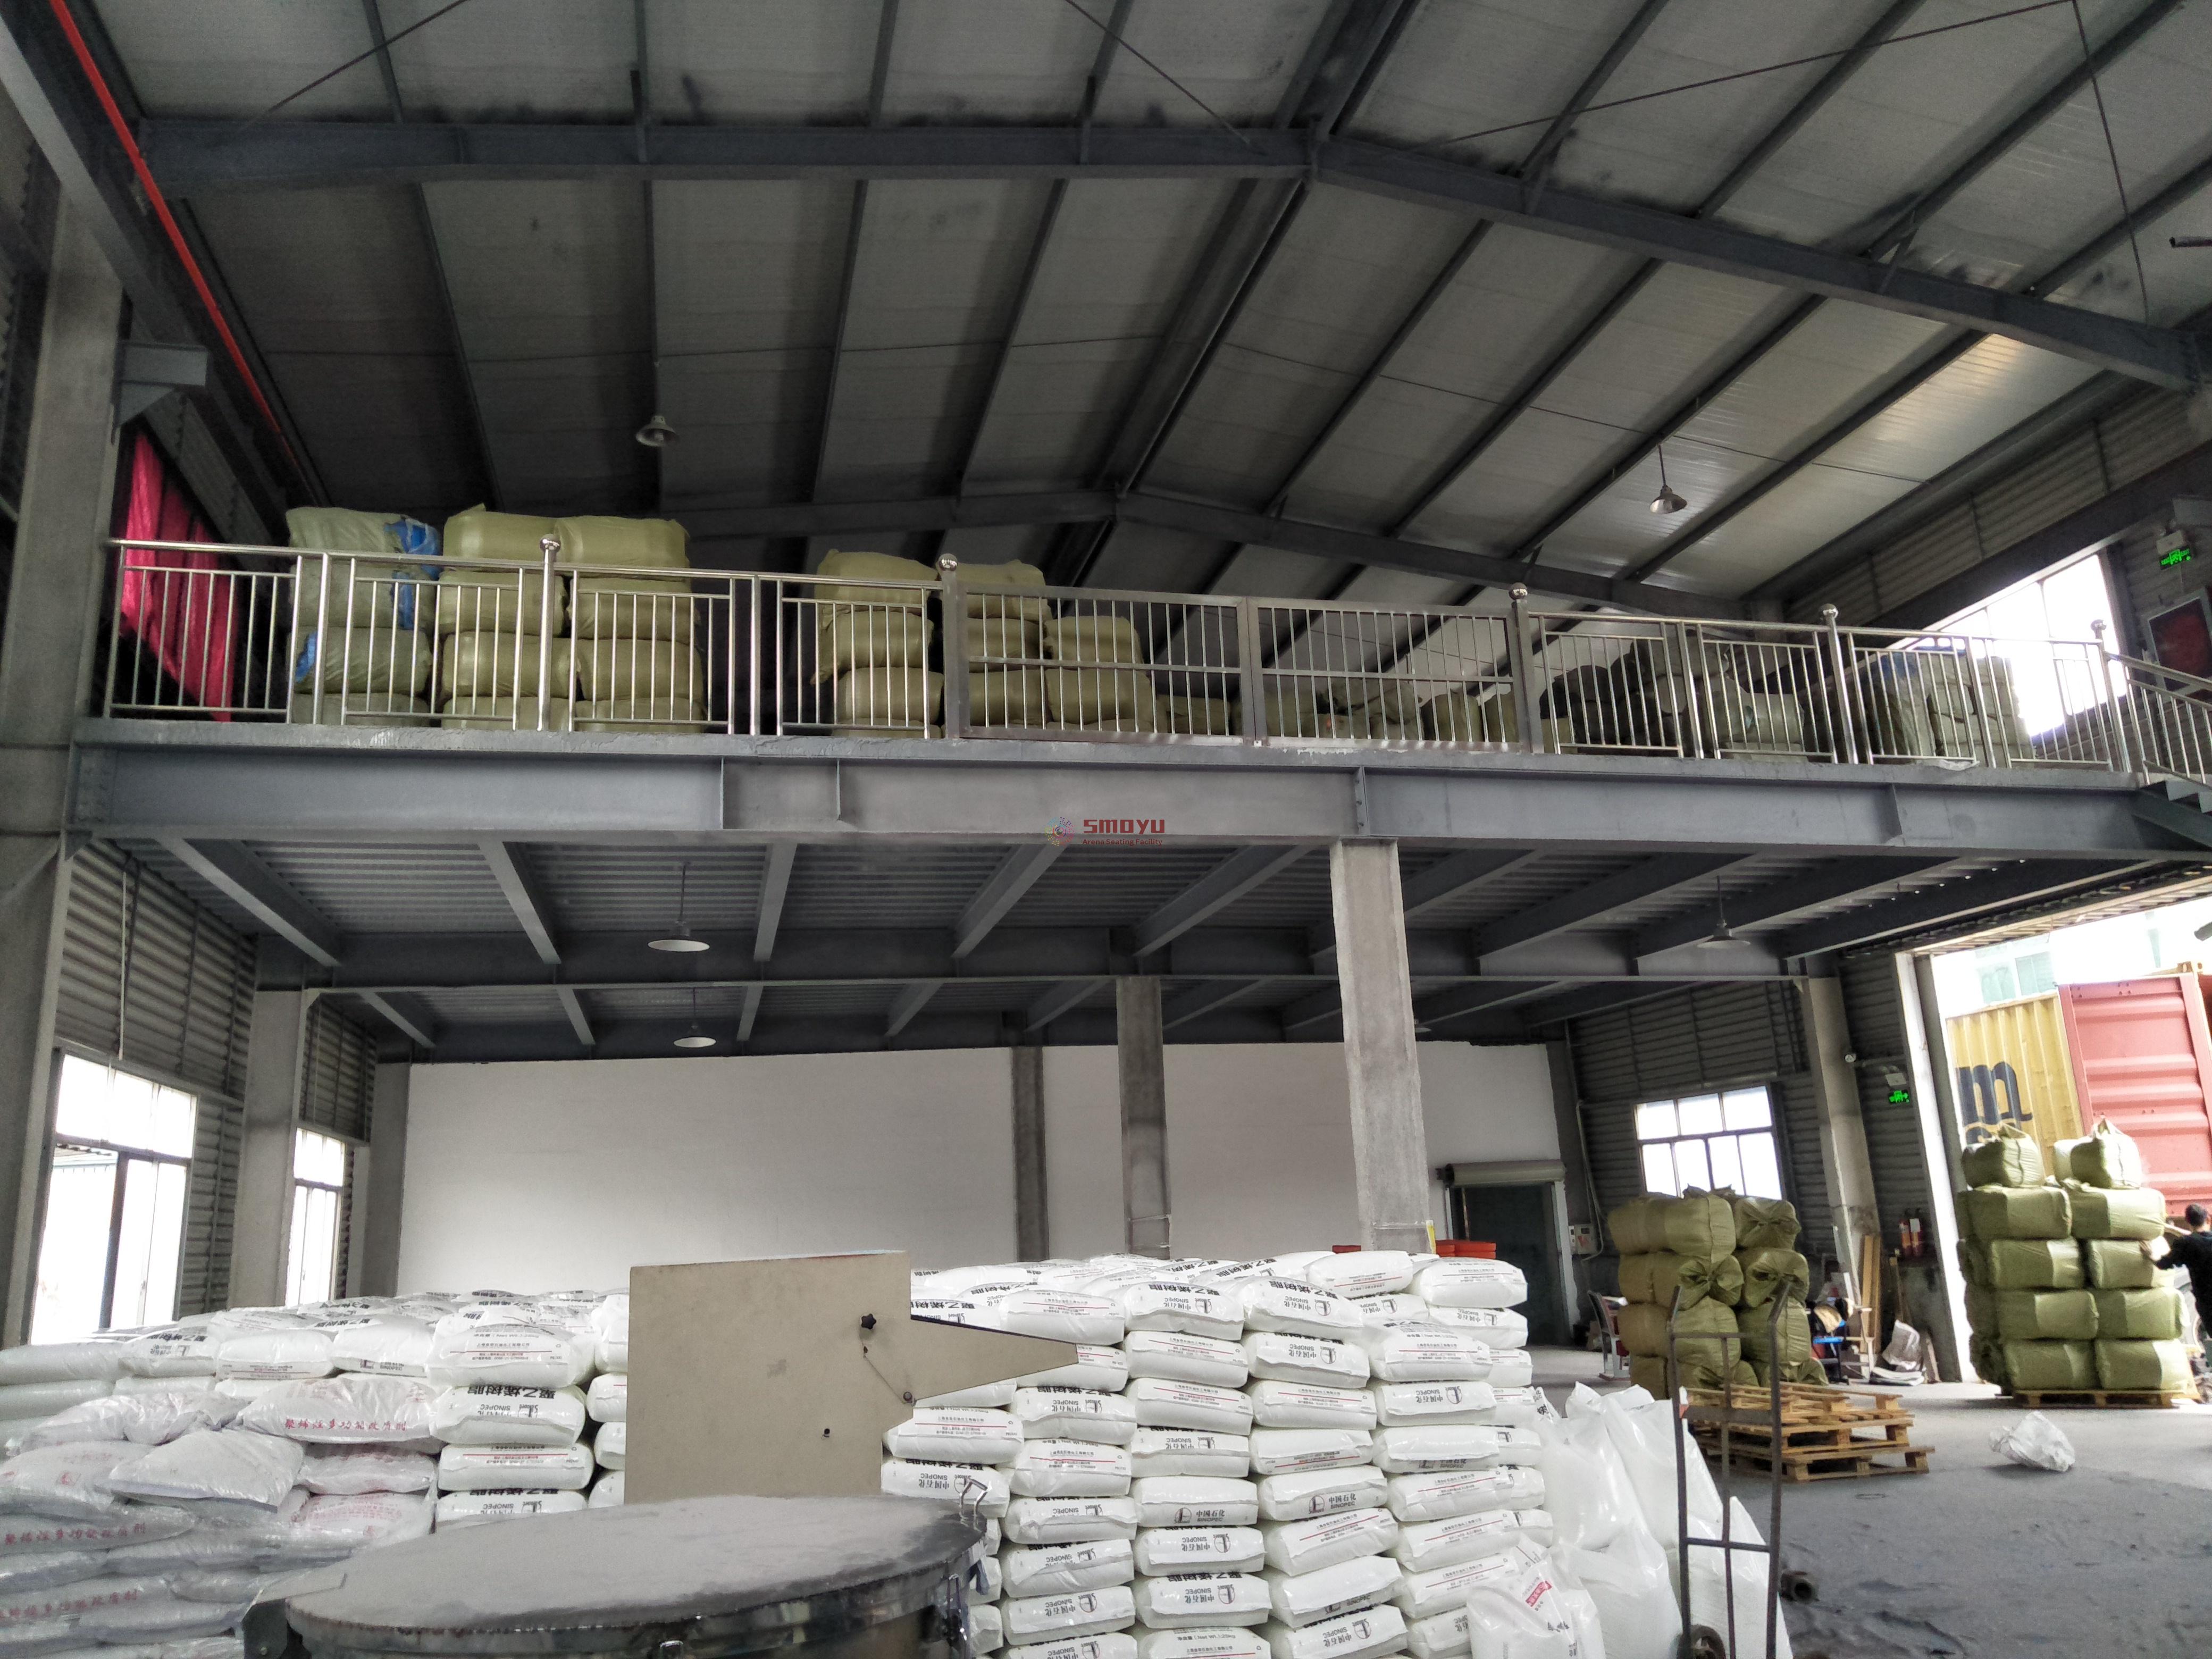 warehouse of material HDPE resin for production of <a href=https://www.arena-seating.com/High-Back-rest-plastic-HDPE-material-stadium-seat-p.html target='_blank'>stadium seat</a>